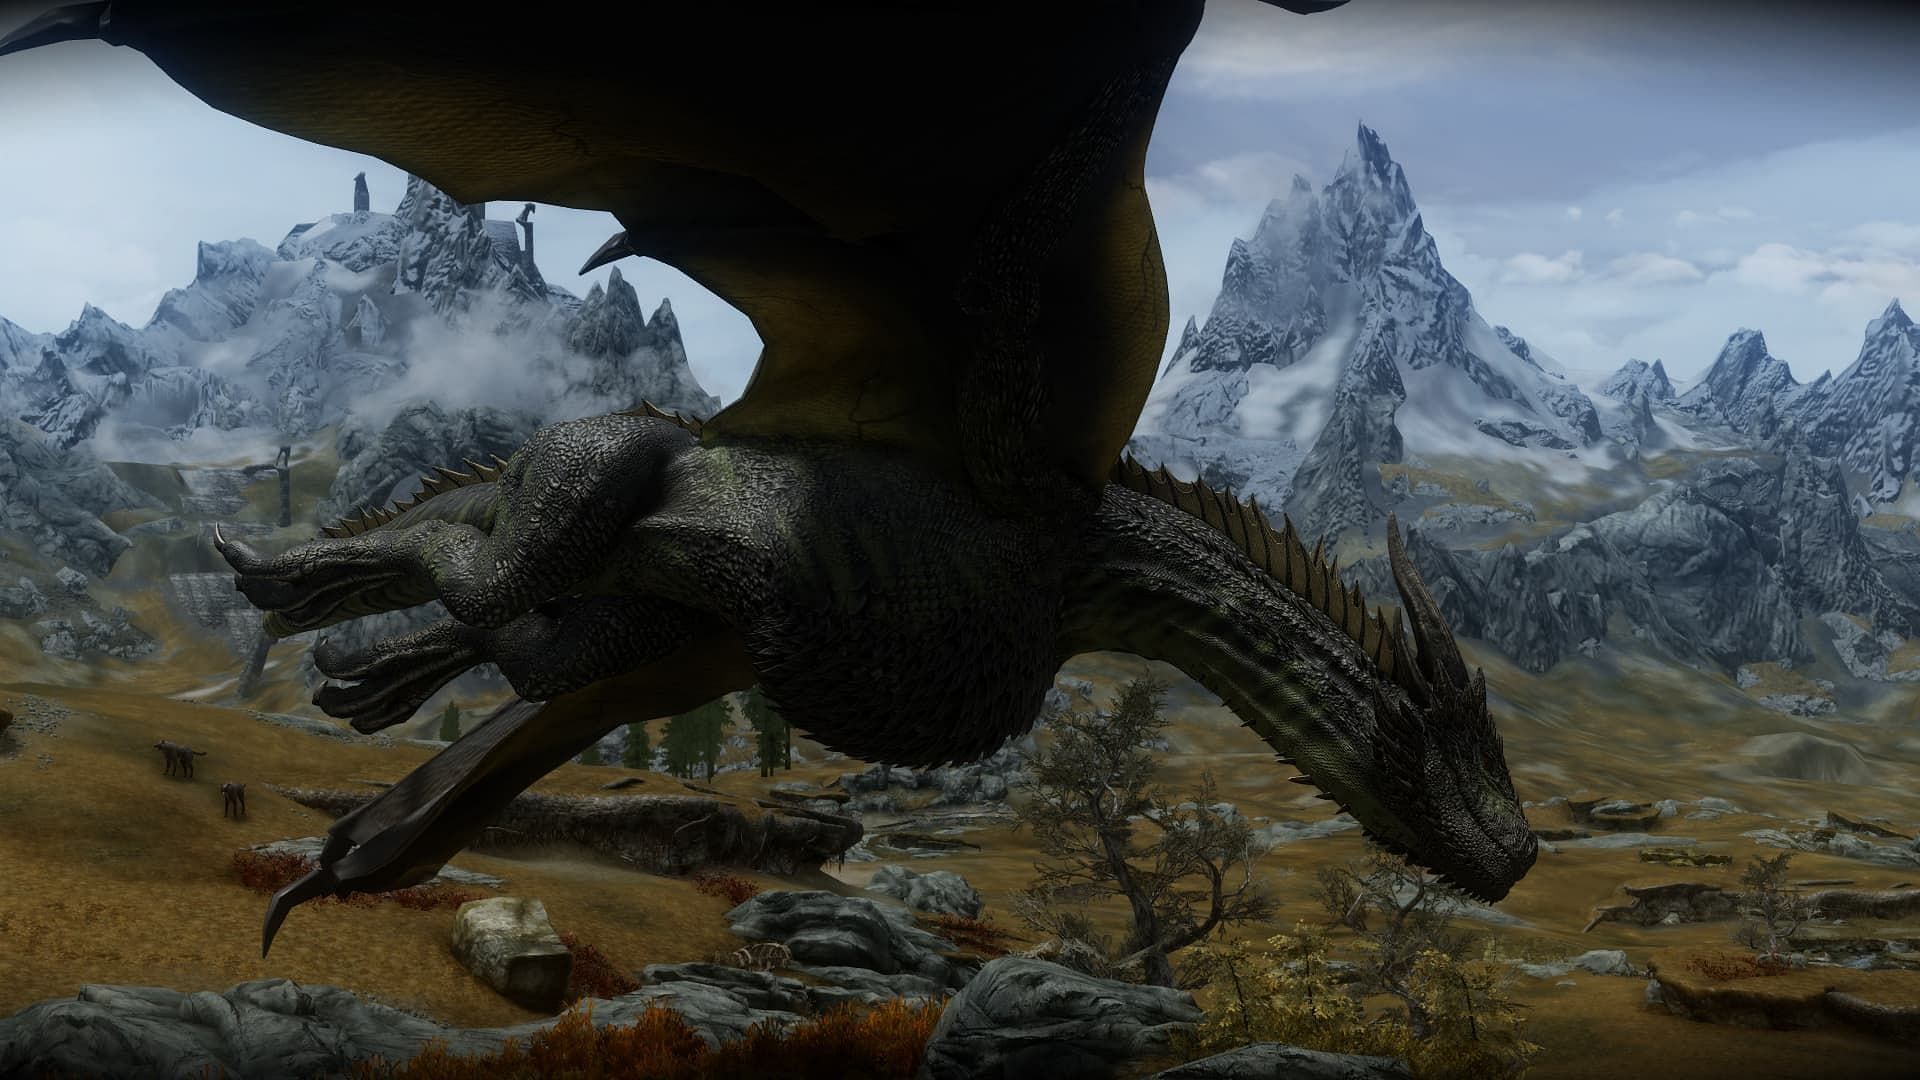 Four of the most promising Game of Thrones mods